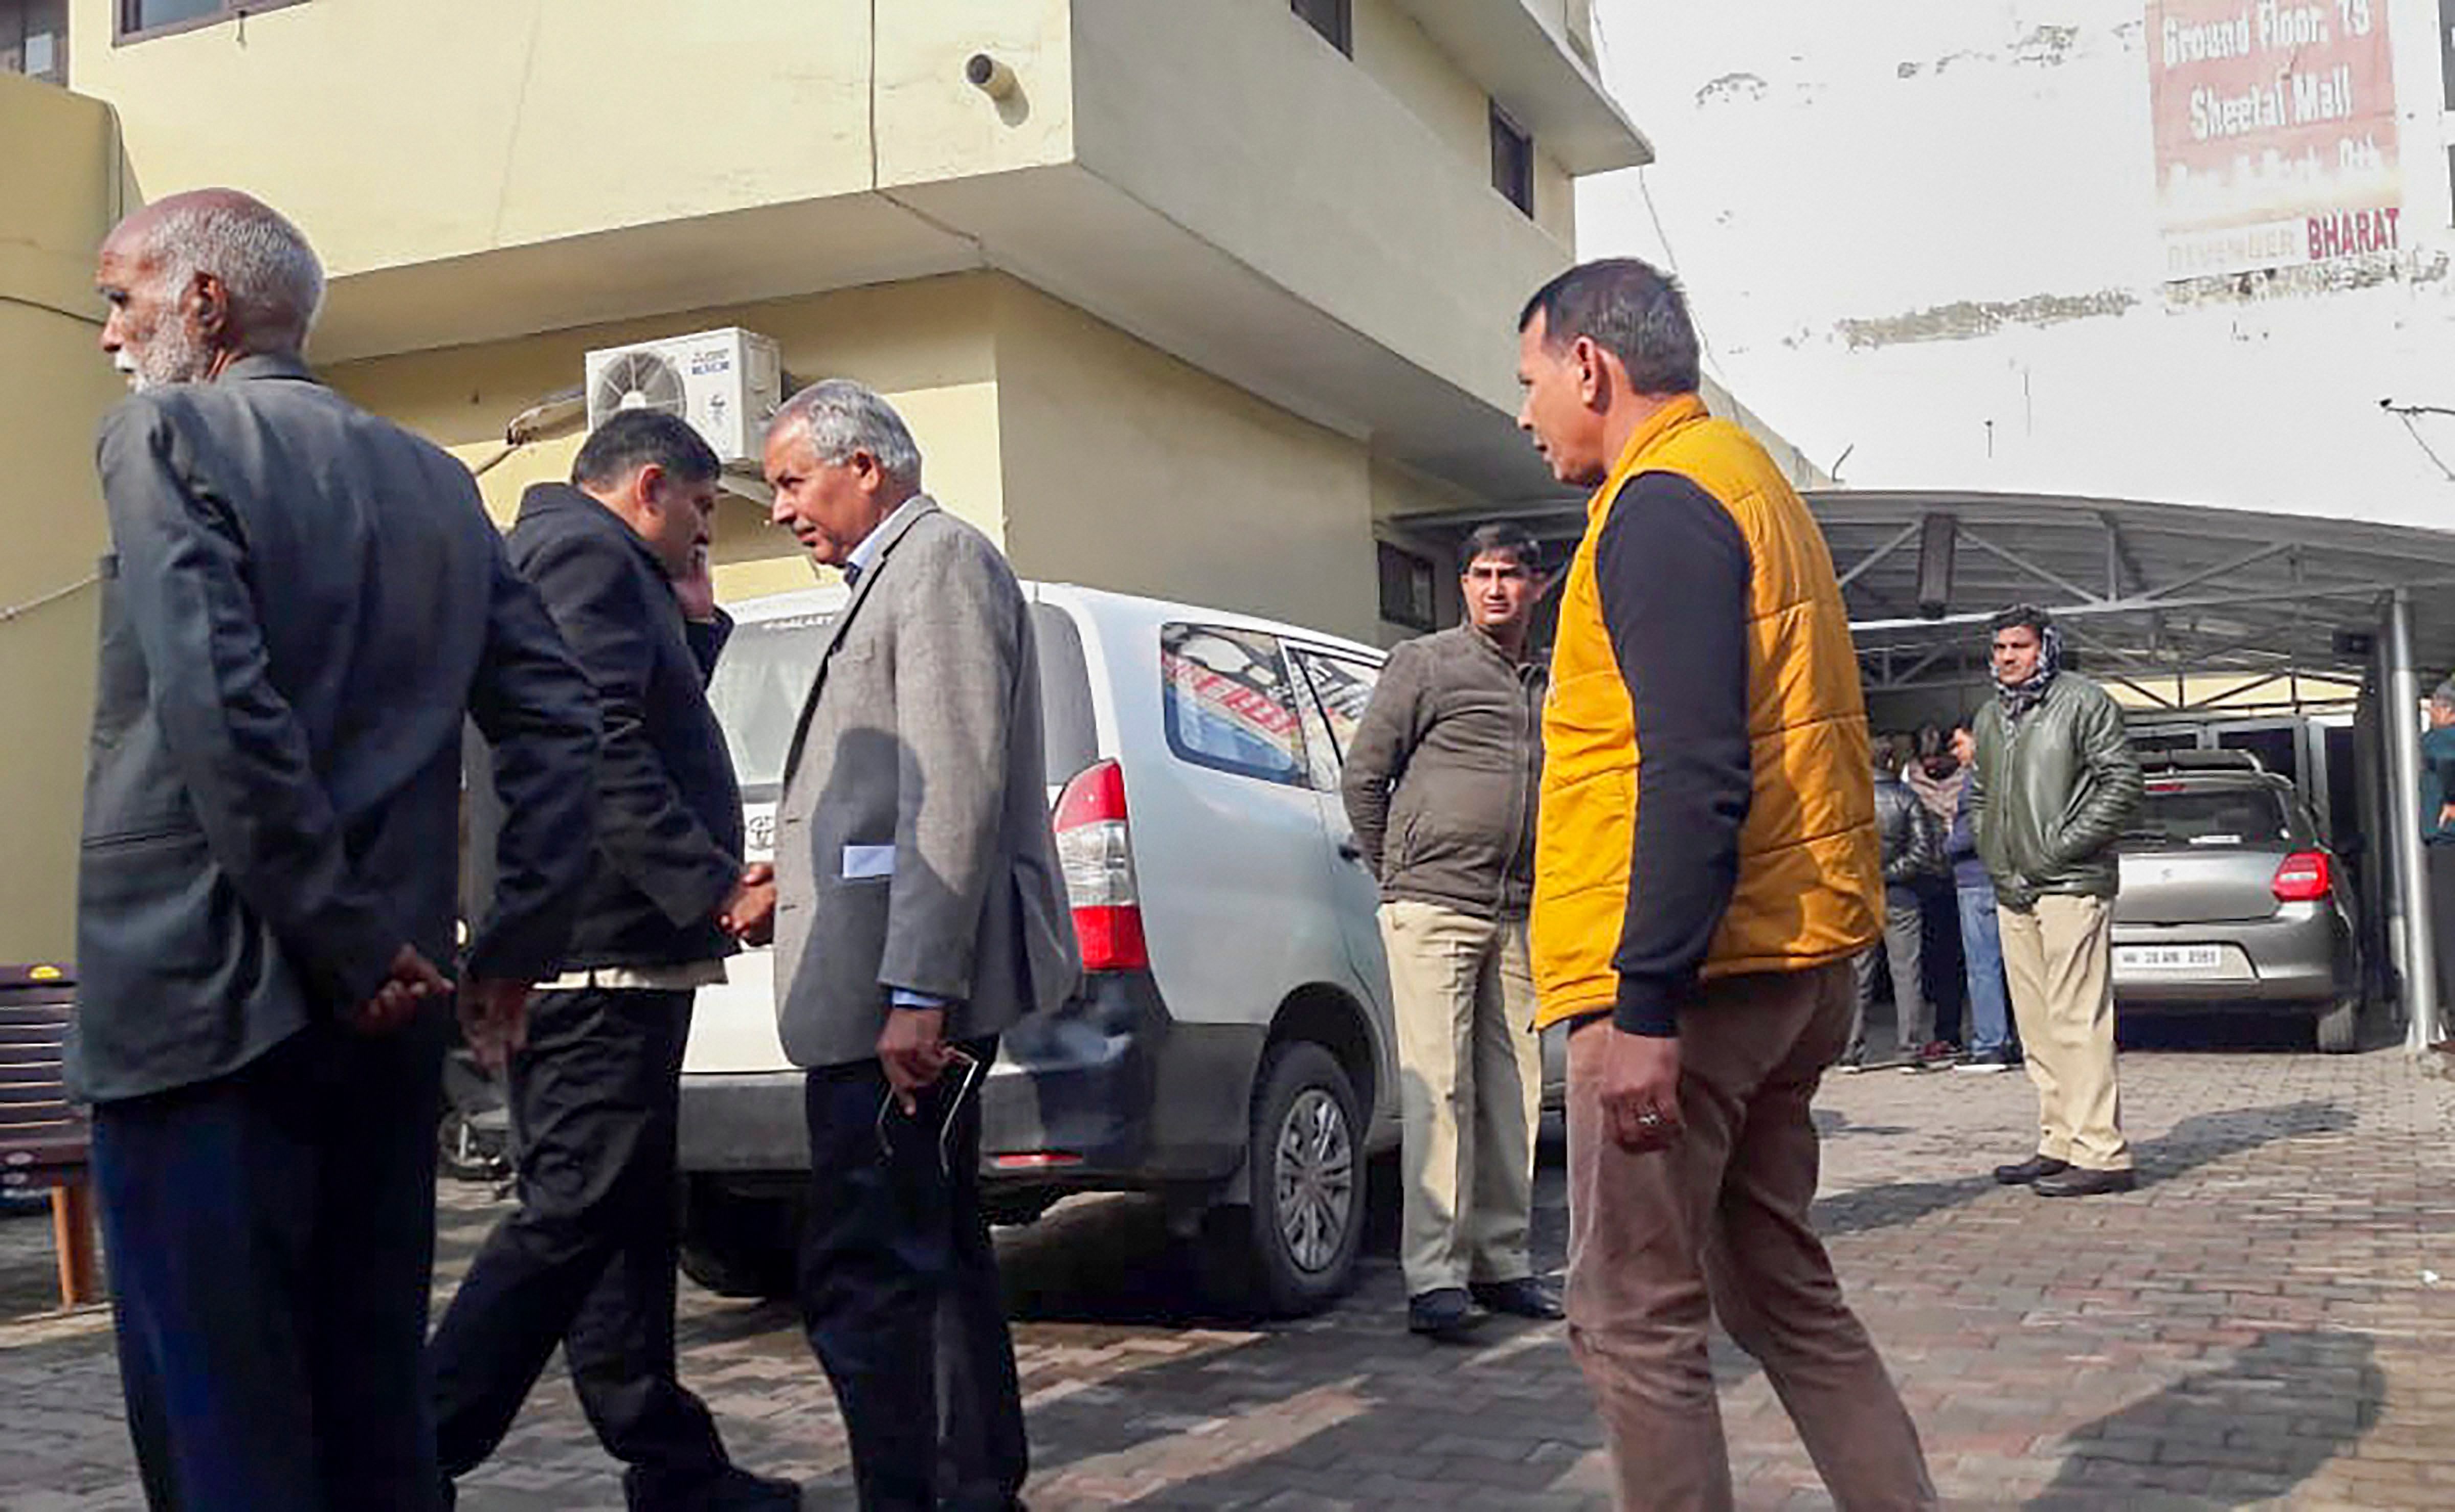 A scene at the residence of former Haryana chief minister and senior Congress leader Bhupinder Singh Hooda during a CBI raid, in Rohtak. (PTI File Photo)